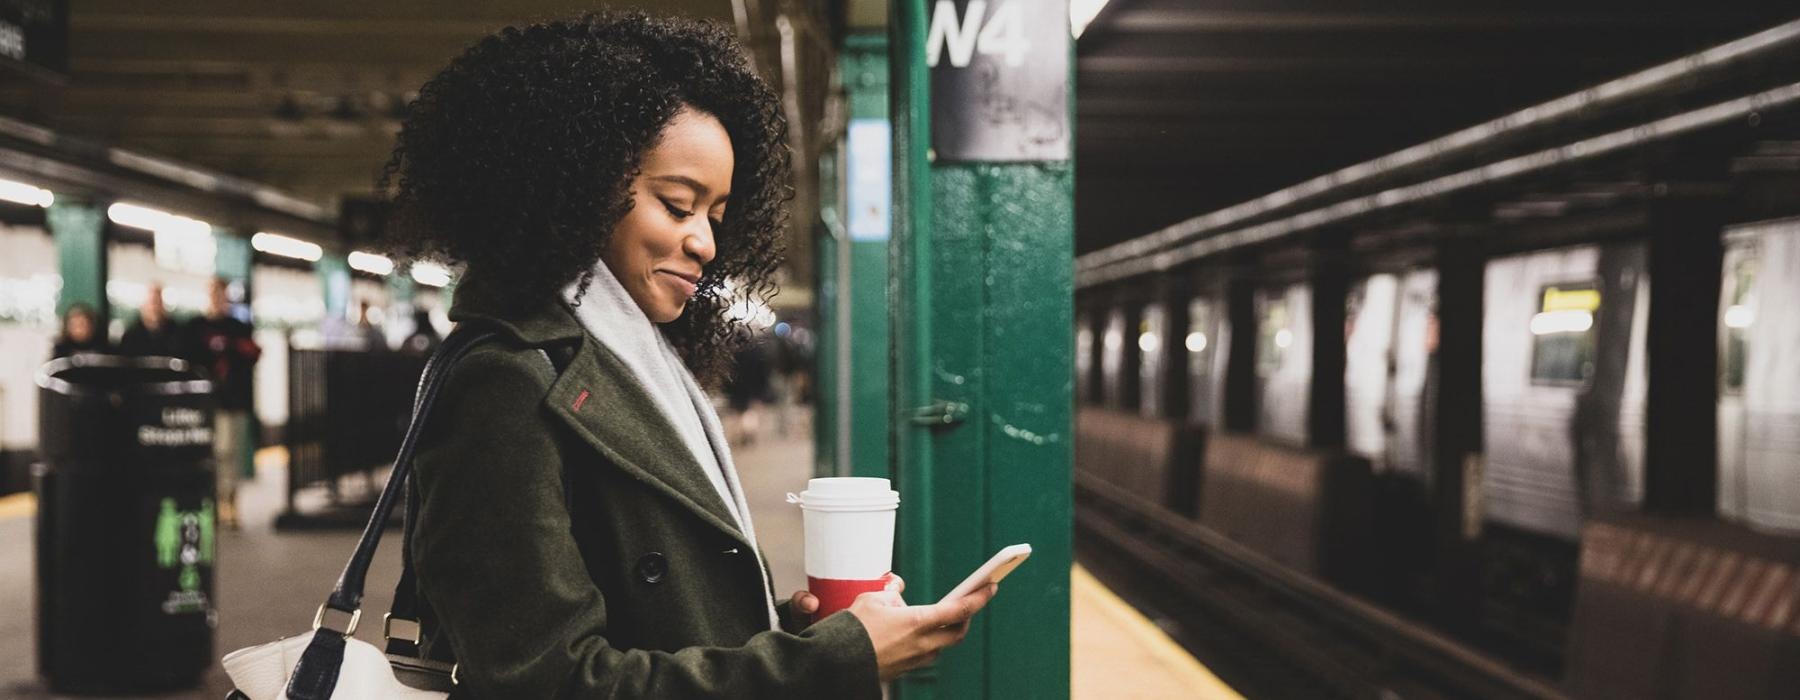 woman with a cup of coffee texts on subway station platform